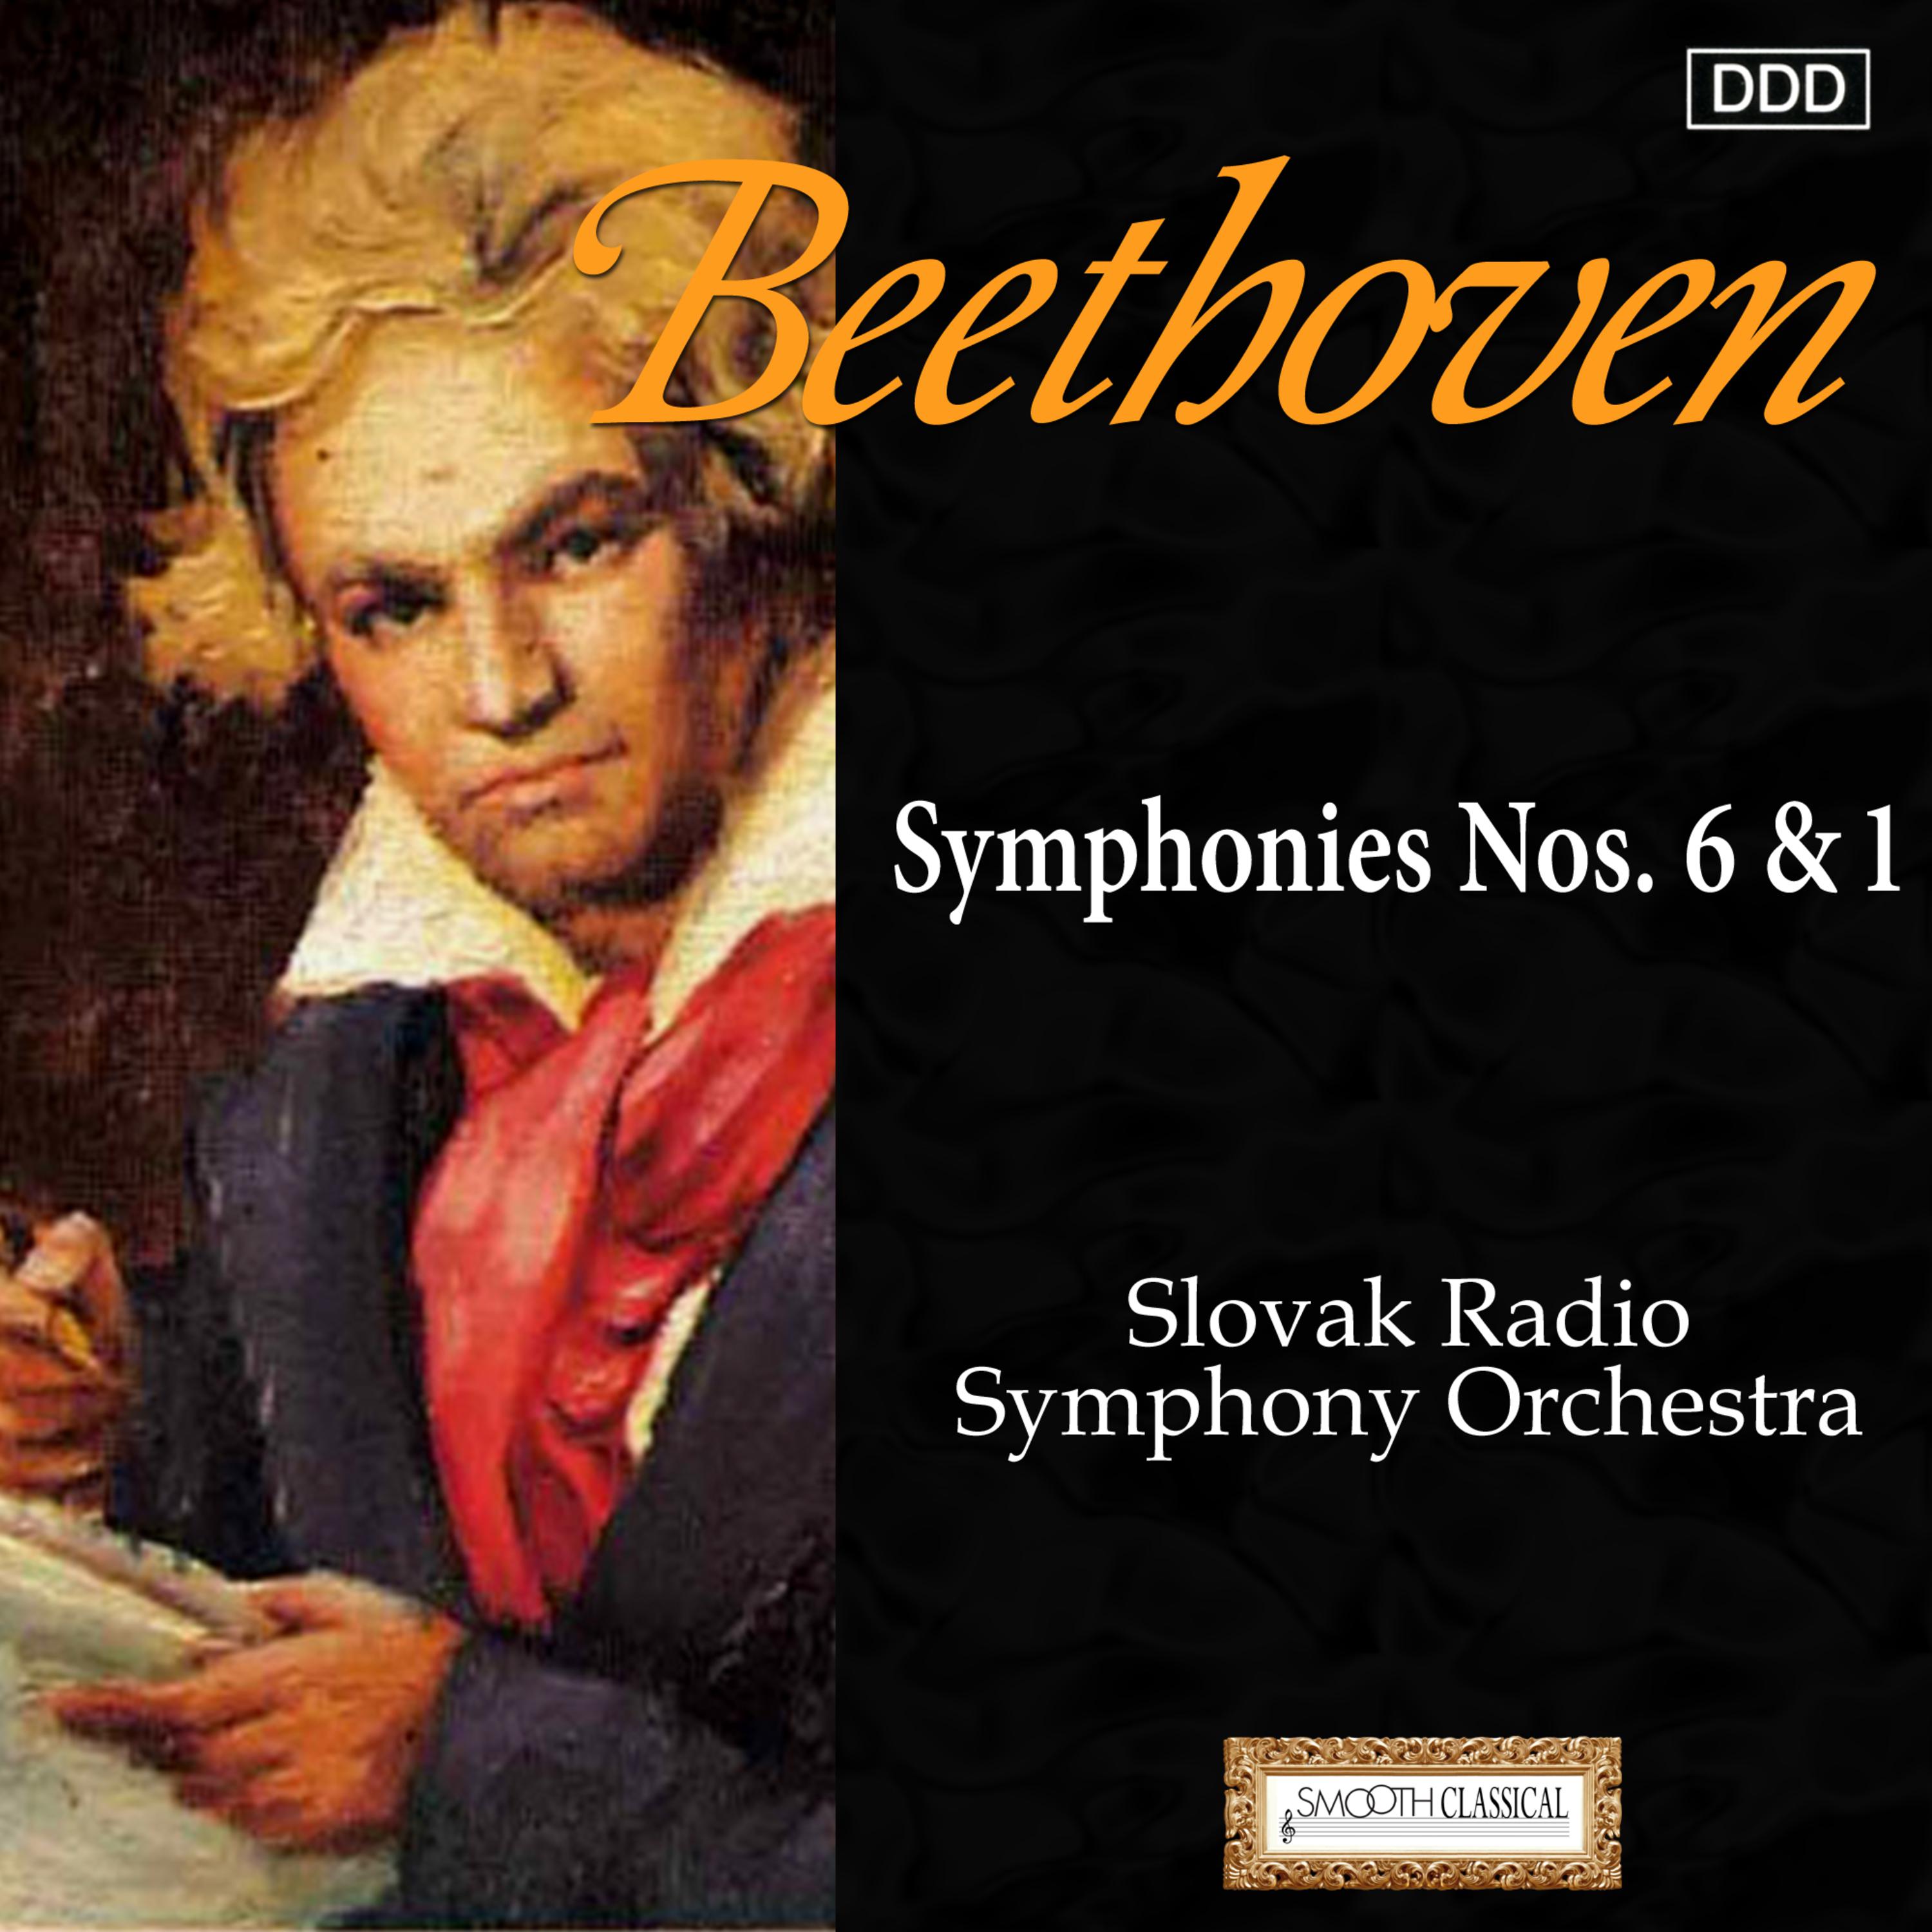 Beethoven: Symphonies Nos. 6 "Pastoral" and 1